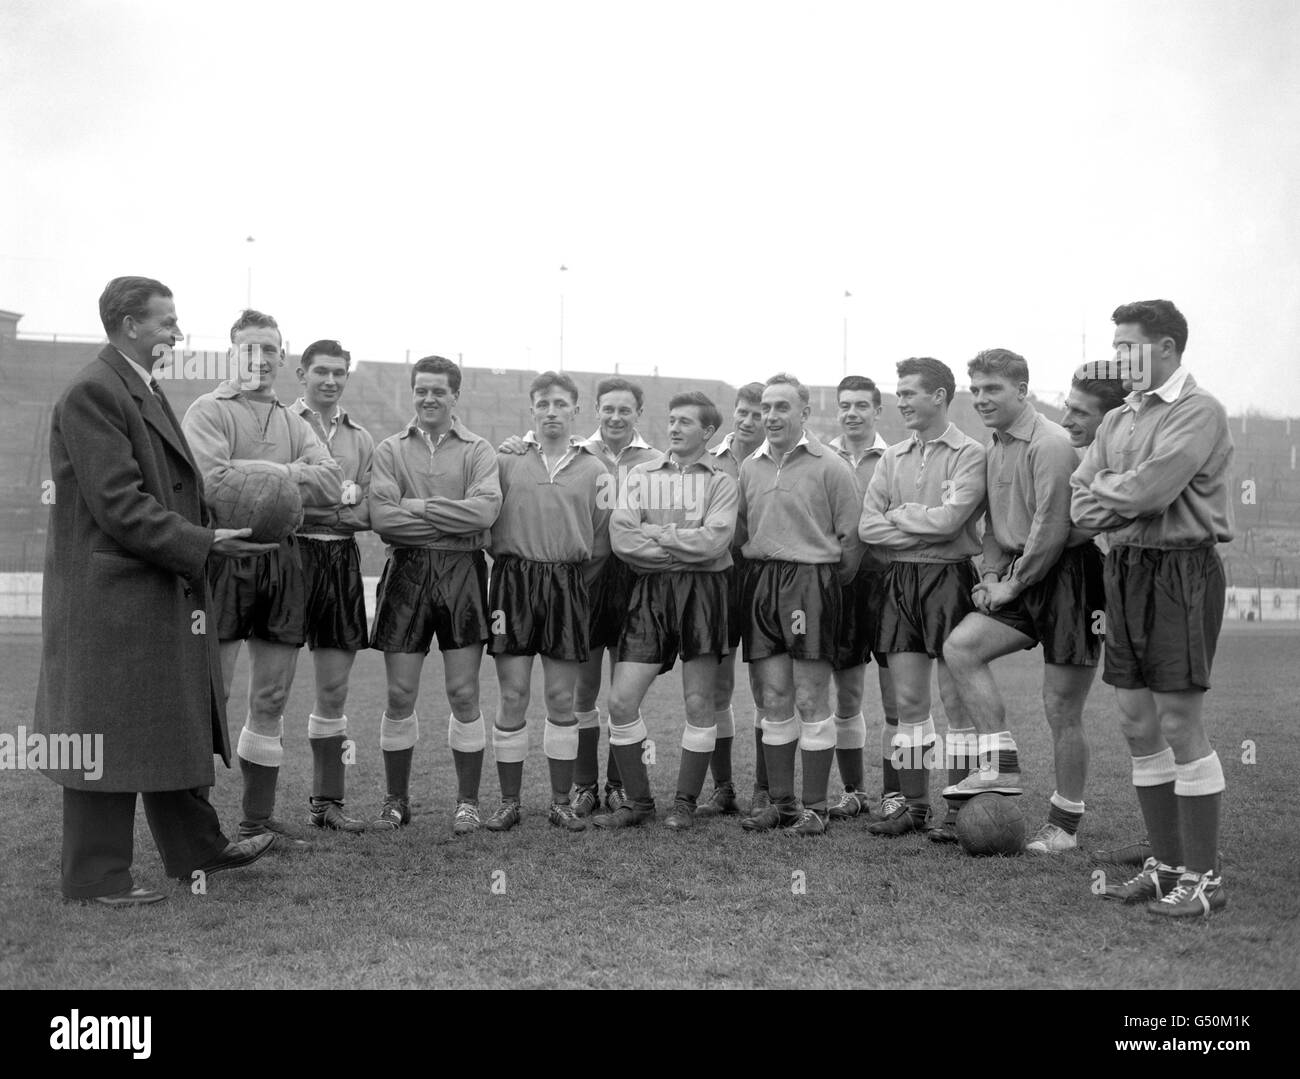 England Manager Walter Winterbottom (l) talking to his England sqaud during a training session ahead of the match against Spain. (l-r) Ron Baynham (Luton Town), John Atyeo (Bristol City), Tommy Taylor (Manchester United), Roger Byrne (Manchester United), Bedford Jezzard (Fulham), Jeff Hall (Birmingham), Jimmy Dickinson (Portsmouth), Billy Wright (Wolverhampton Wanderers), Johnny Haynes (Fulham), Ron Clayton (Blackburn Rovers), Duncan Edwards (Manchester United), Reg Matthews (Coventry City) and Bill Perry (Blackpool). Stock Photo